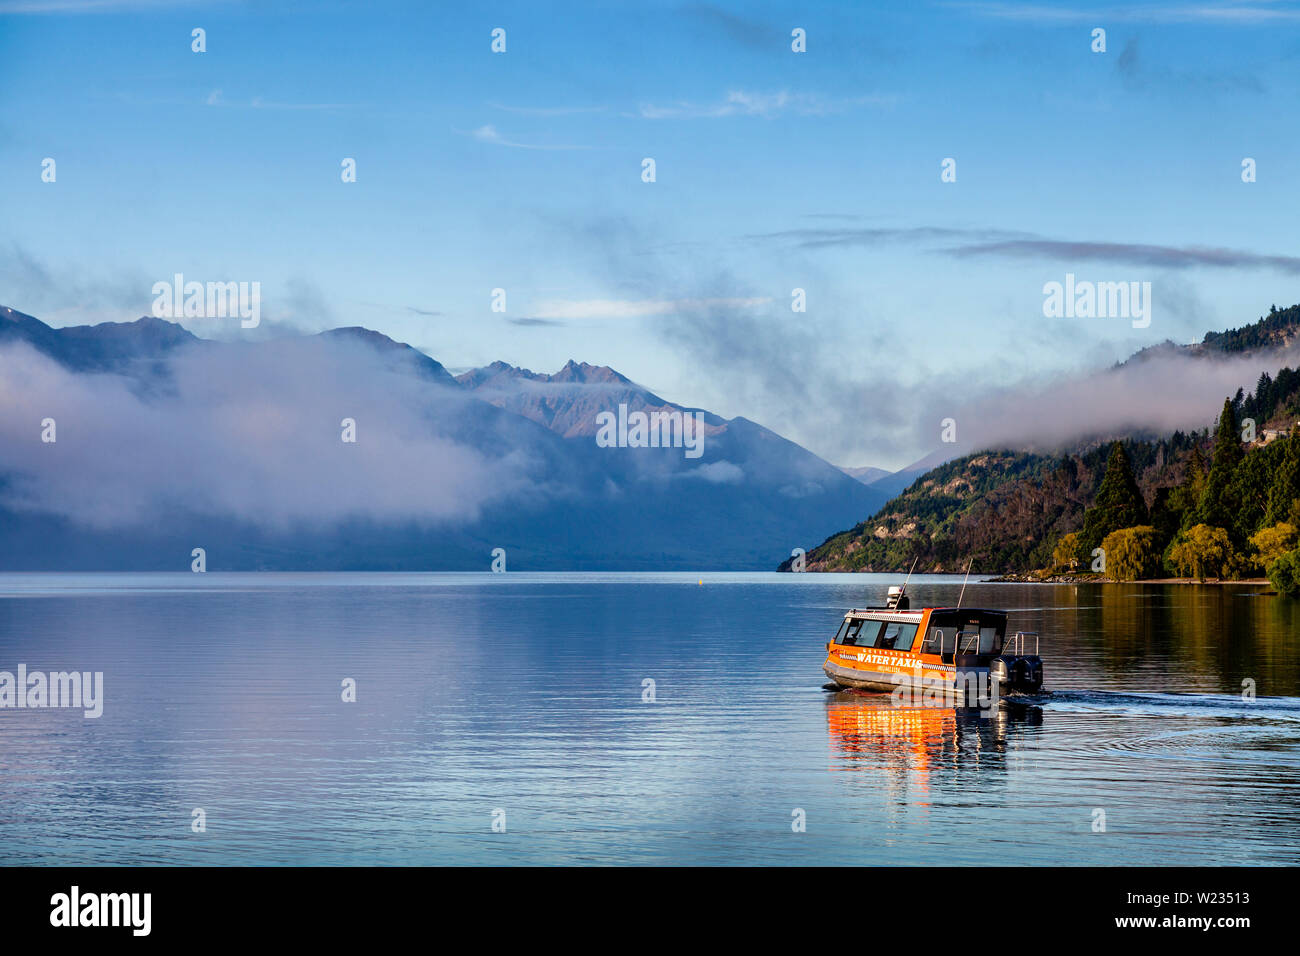 A Water Taxi On Lake Wakatipu, Queenstown, Otago, South Island, New Zealand Stock Photo